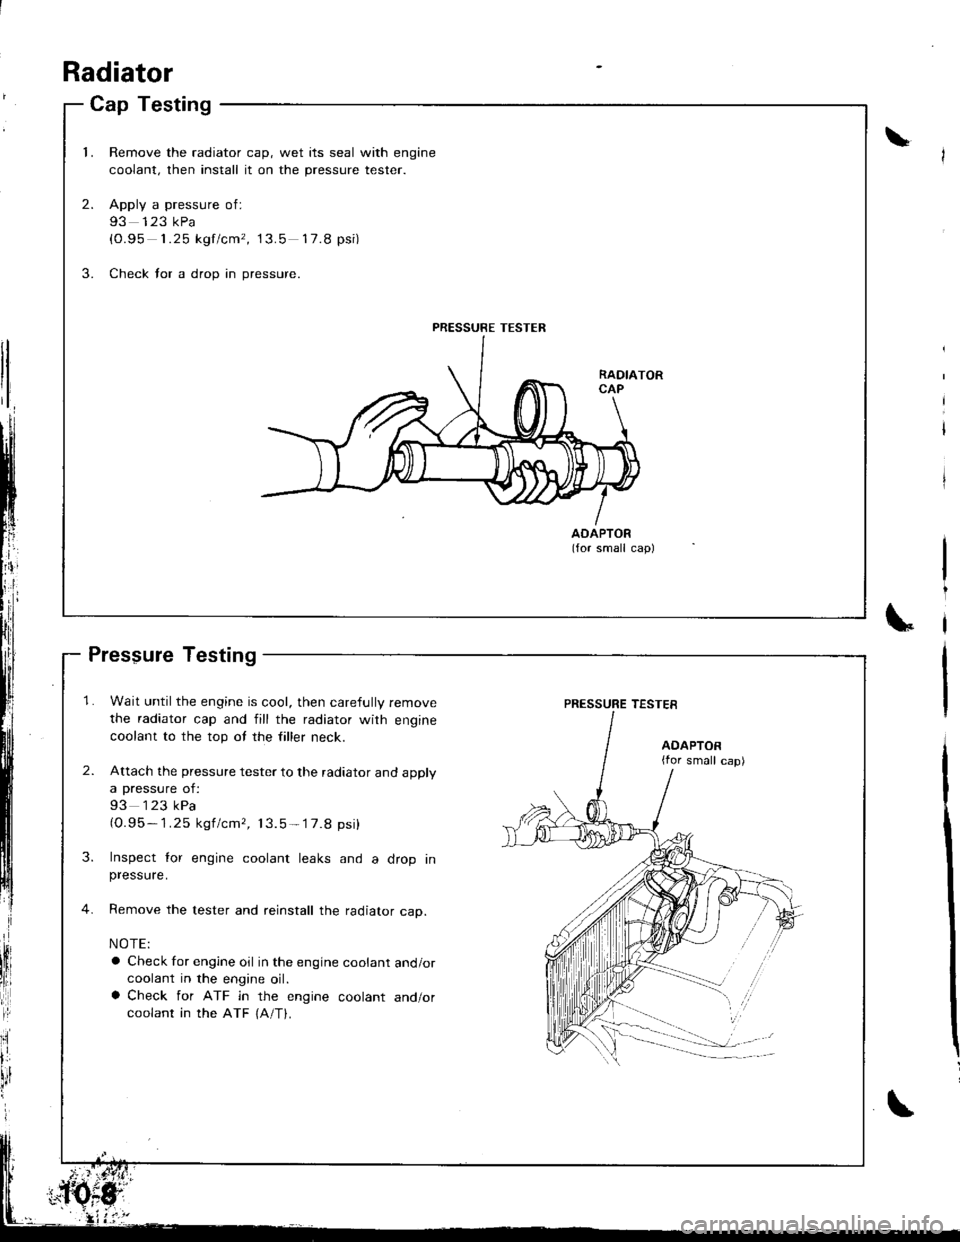 HONDA INTEGRA 1998 4.G Workshop Manual Cap Testing
1.Remove the radiator cap, wet its seal with engine
coolant, then install it on the pressure tester.
Apply a pressure of:
93 123 kPa(0.95 1.25 kgf/cm, 13.5 17.8 psi)
Check for a drop in p